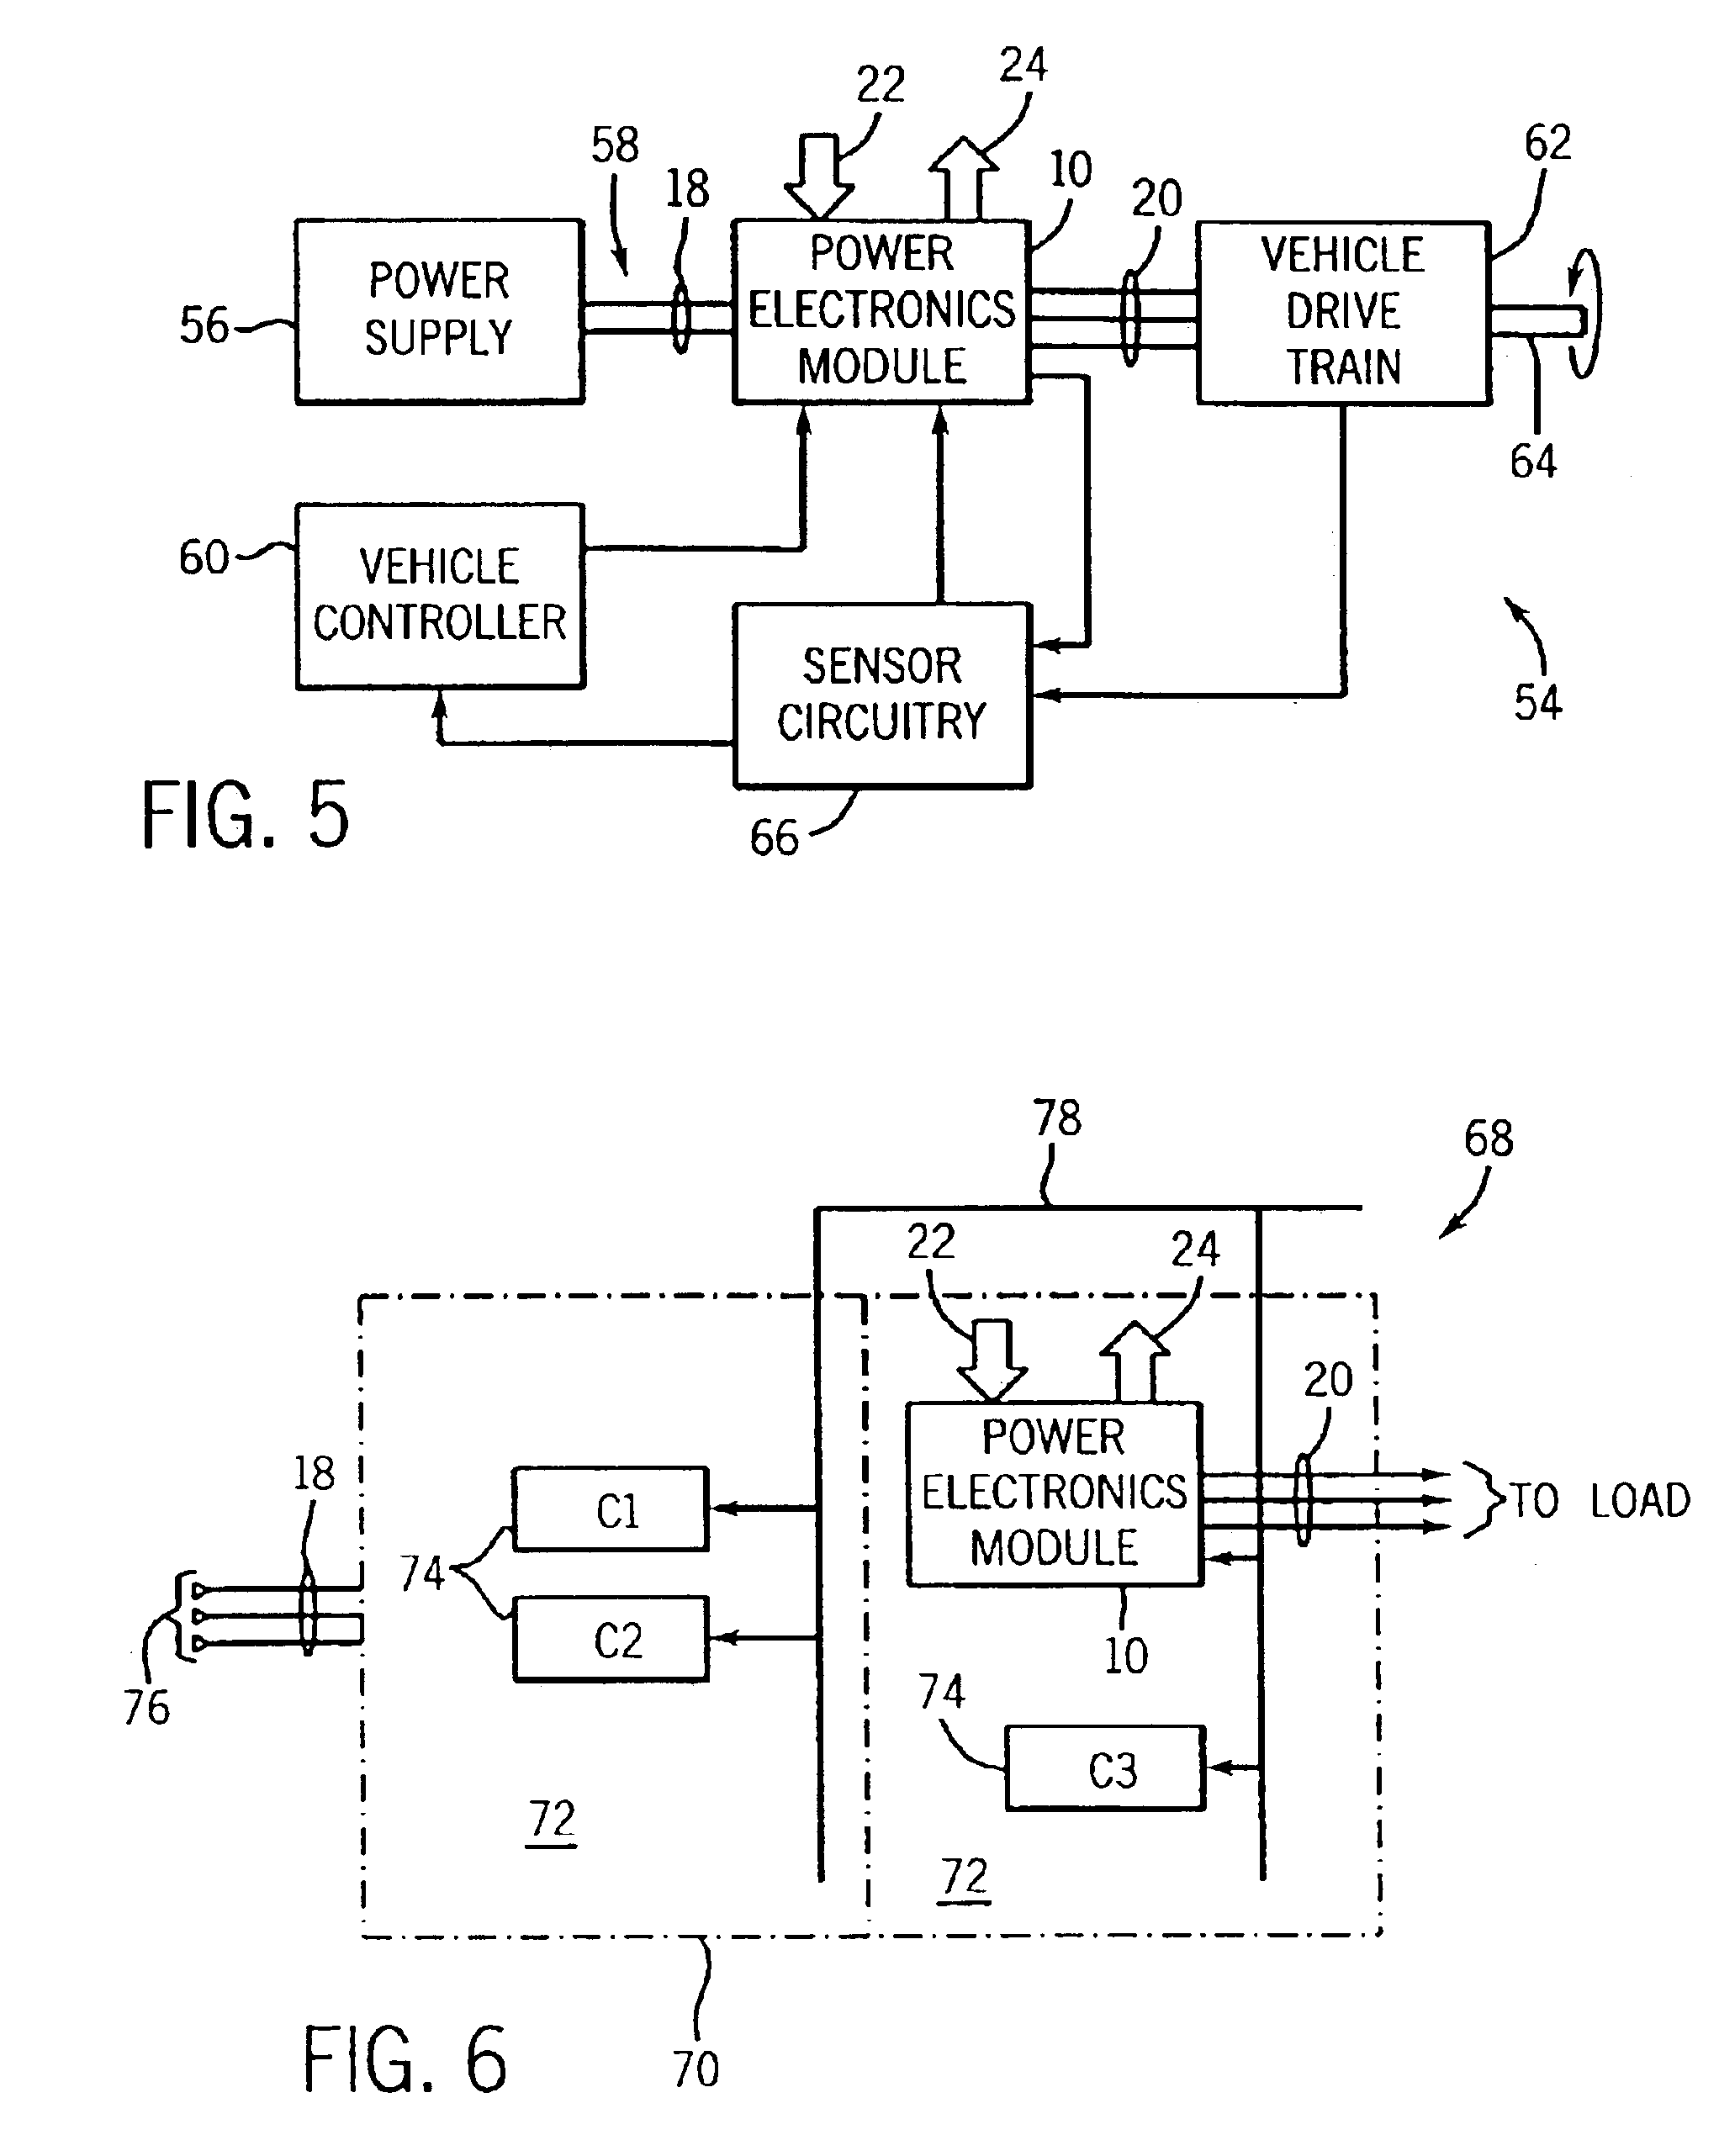 Compact fluid cooled power converter supporting multiple circuit boards